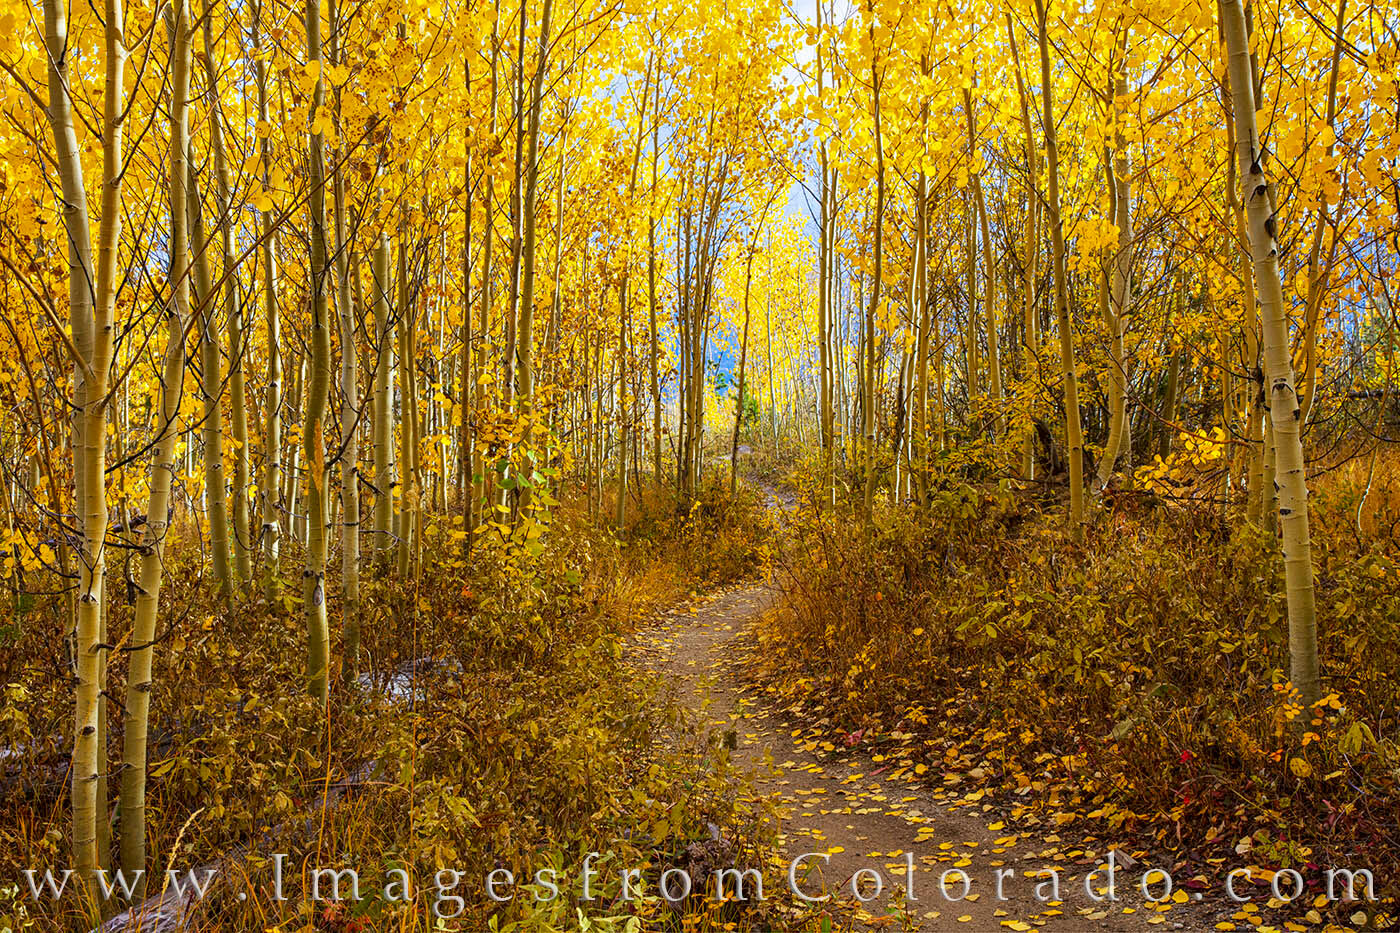 On a cold fall morning, this trail near the resort town of Winter Park was draped in gold and orange aspens.